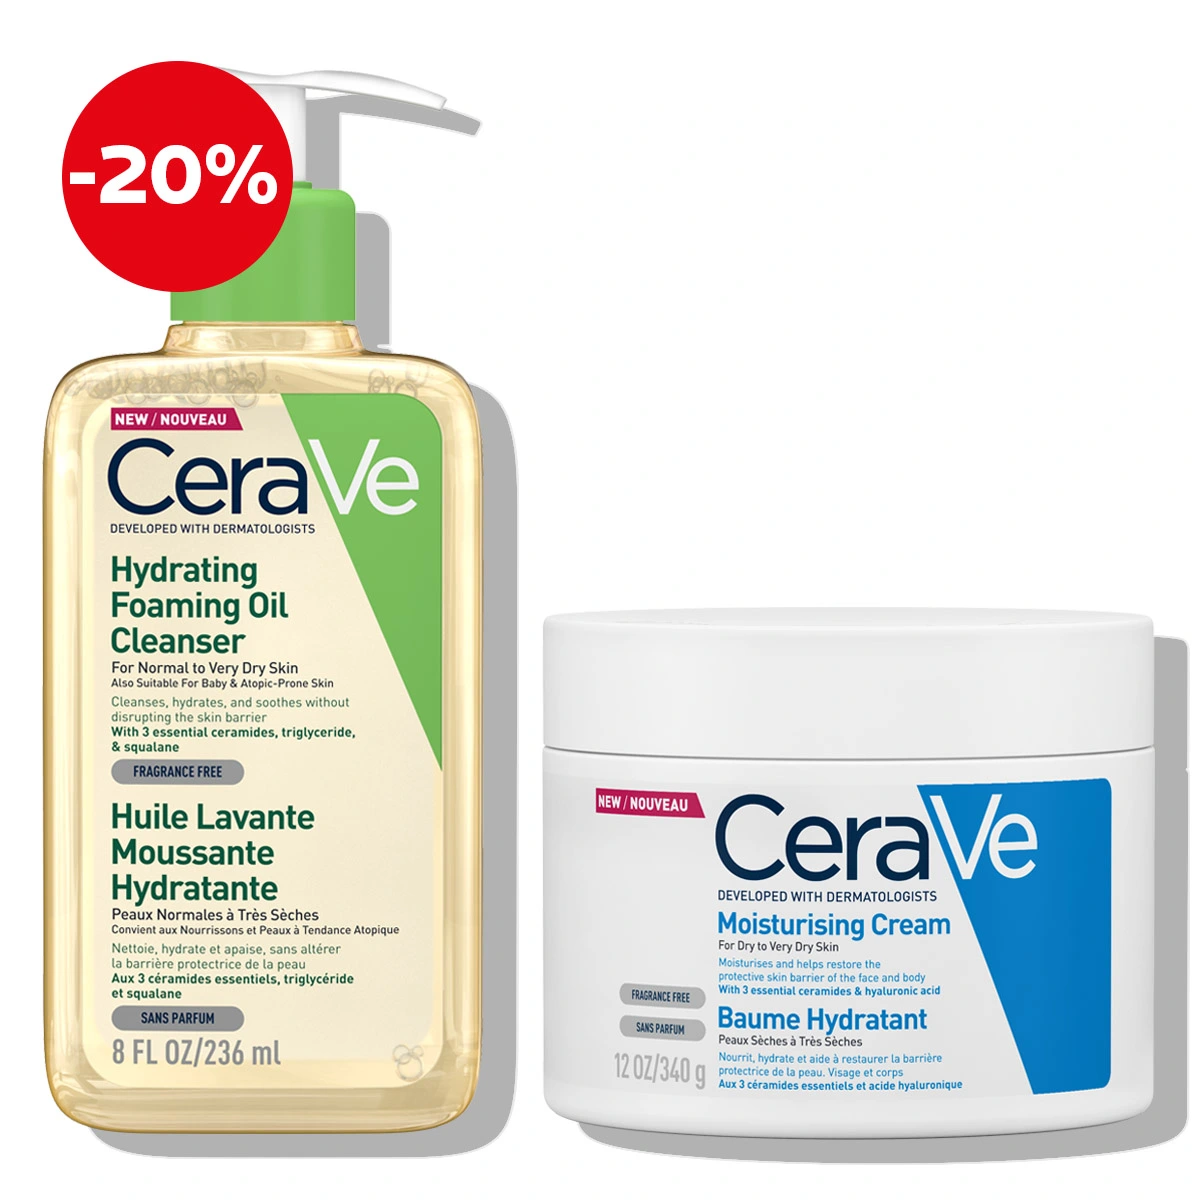 CeraVe-Daily-Face-_-Body-Protocol-For-Very-Dry-Skin-Prone-to-Atopy-_Cleansing-And-Care_-_1_